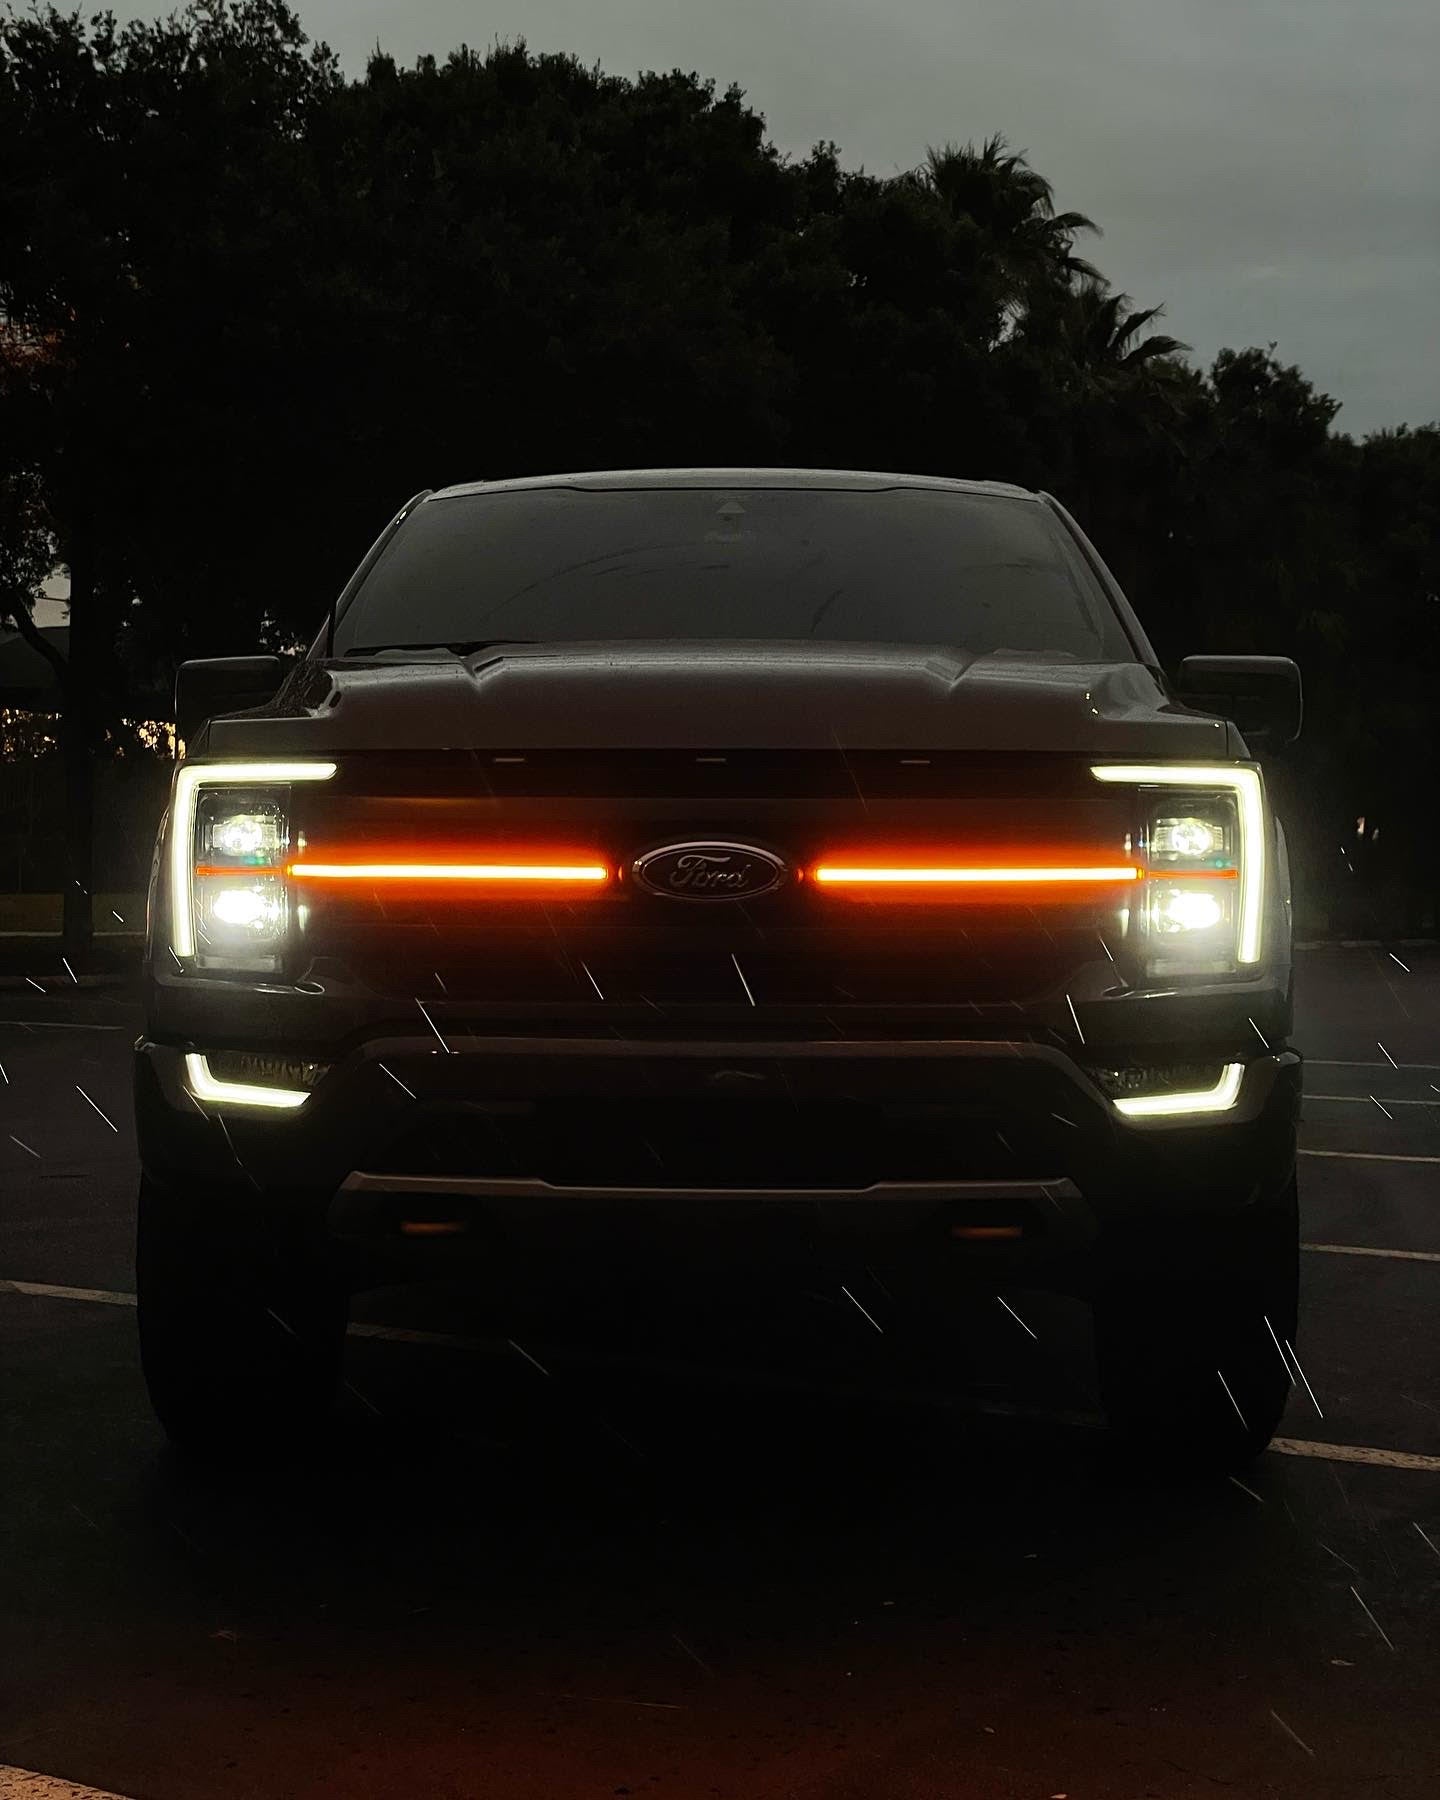 Tremor Amber Grille Lights - Pre-Order Group 1(25 units - Estimated February 2024 Delivery)